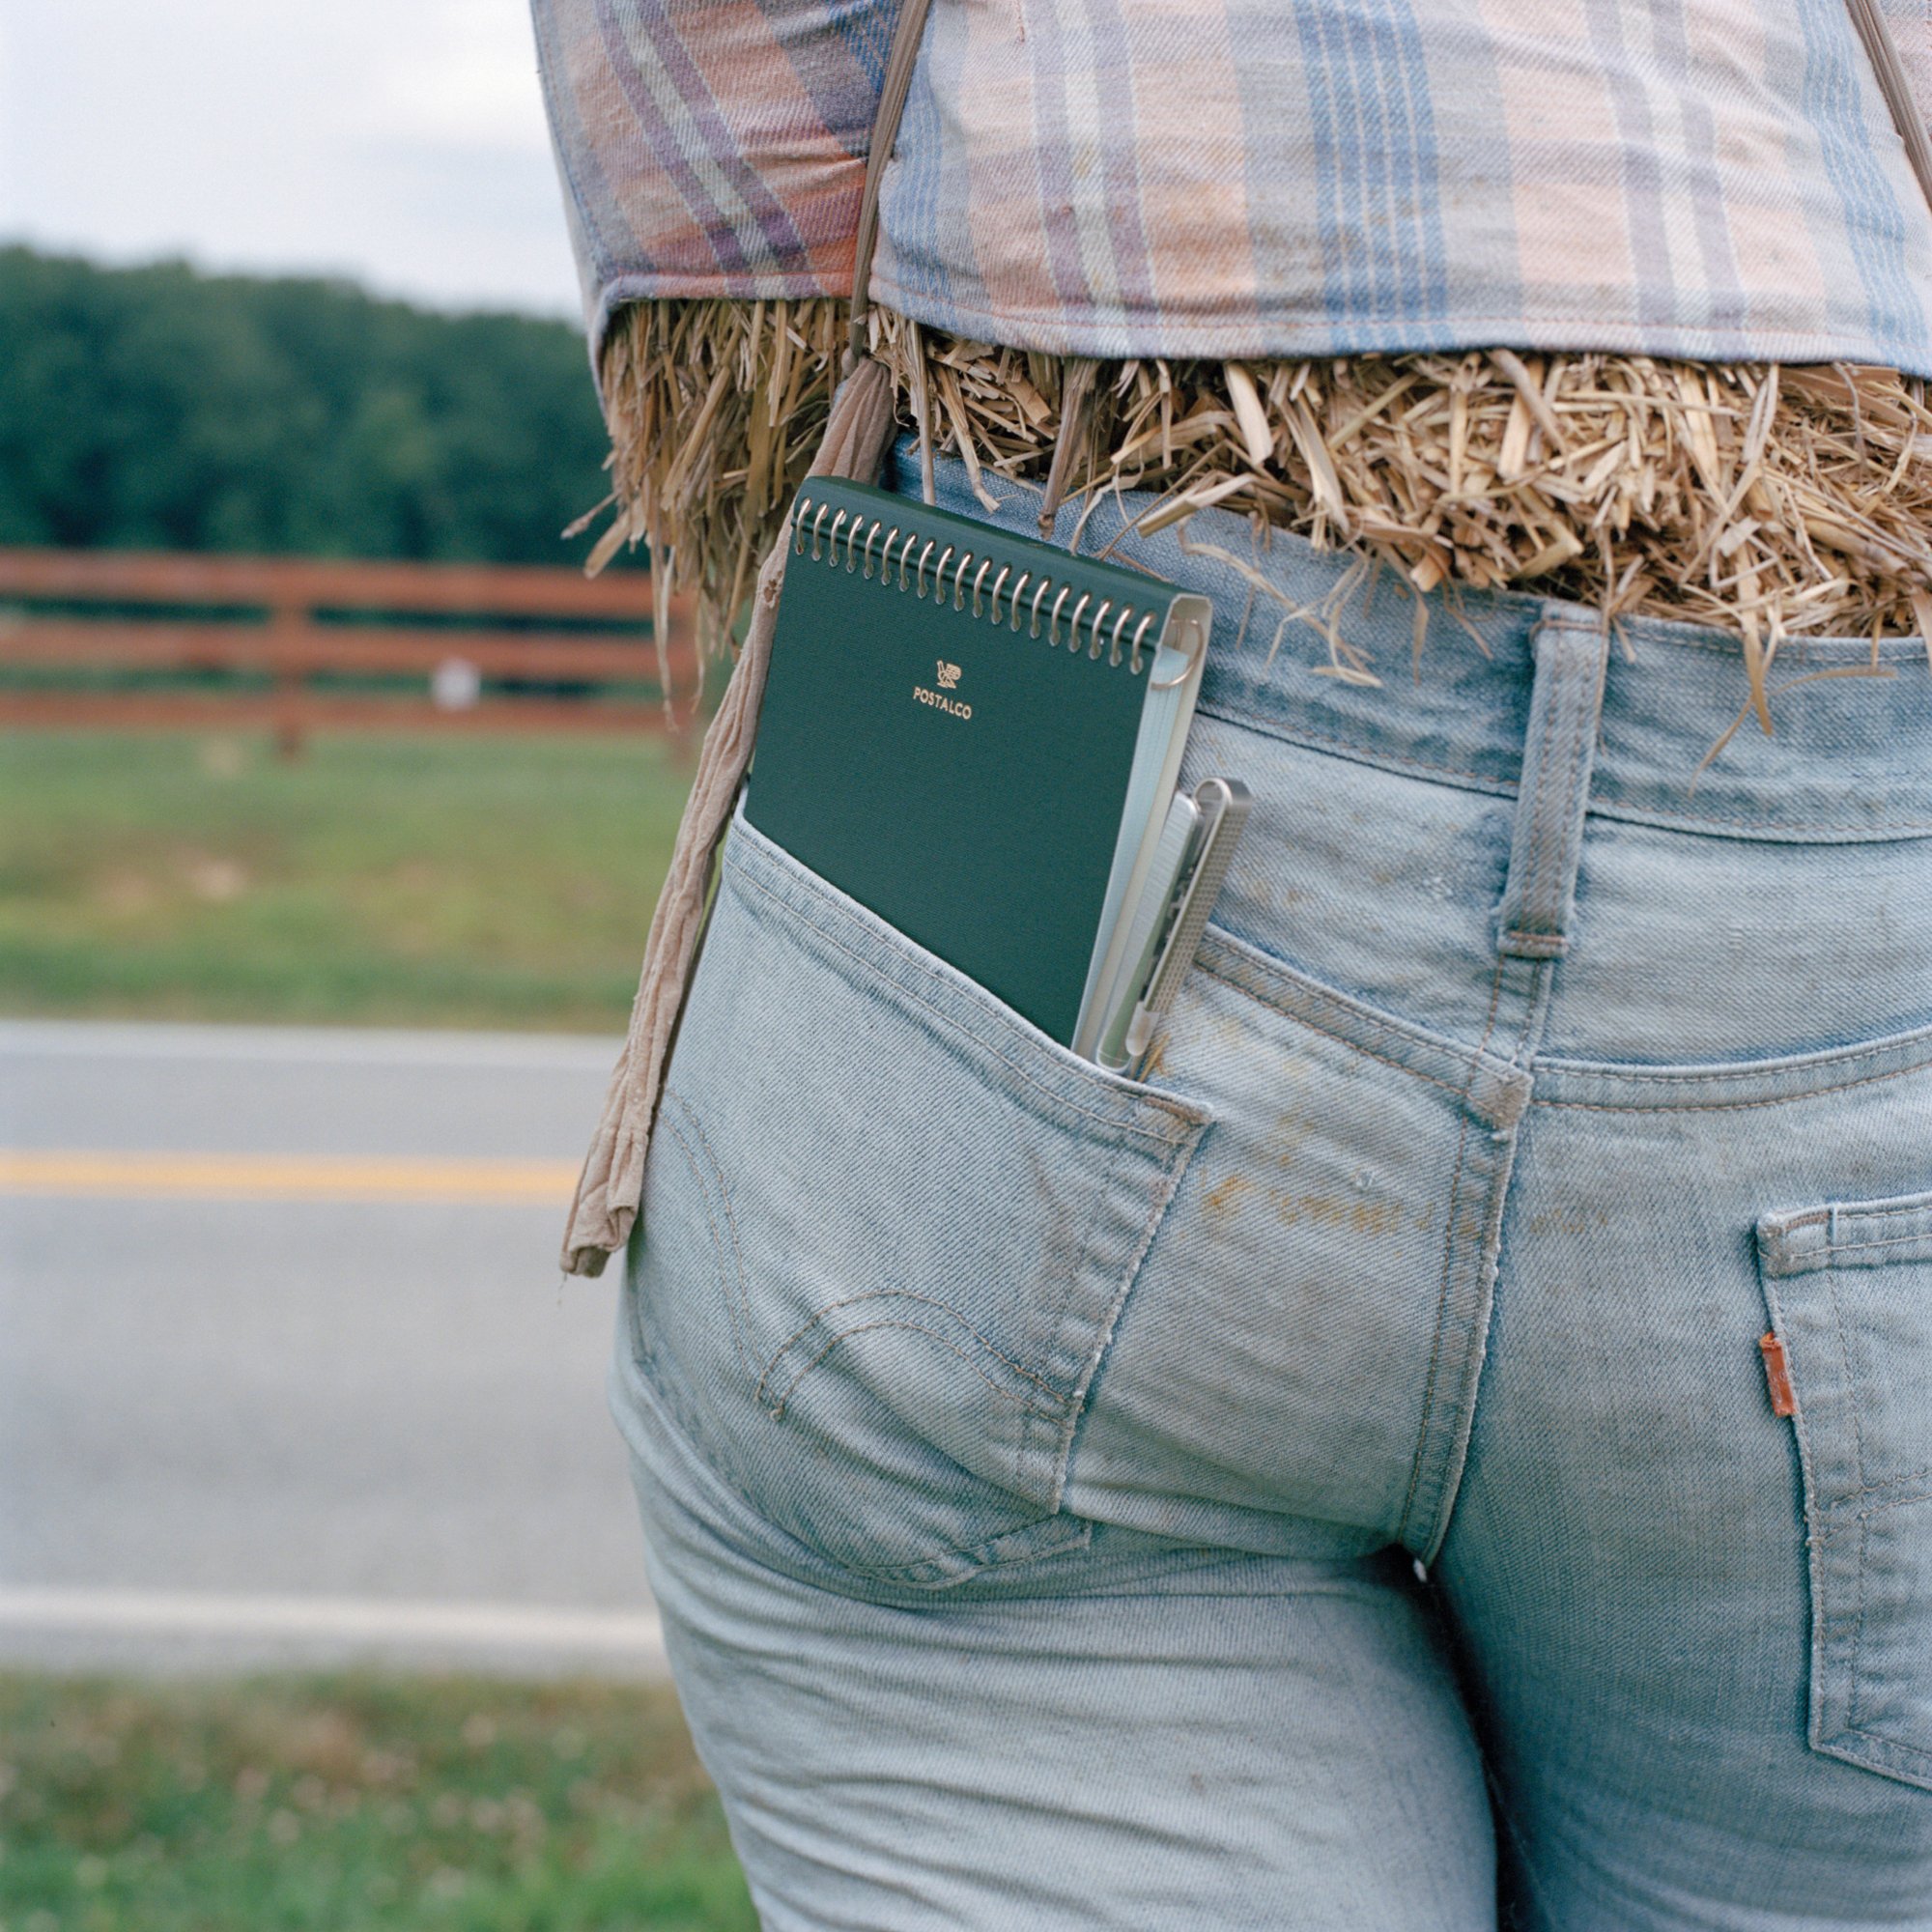 A notepad and pen protruding from the back pocket of faded skinny jeans stuffed with hay, dried grass. The figure appears to be standing in front of a road that runs by a grassy field with a wooden fence.